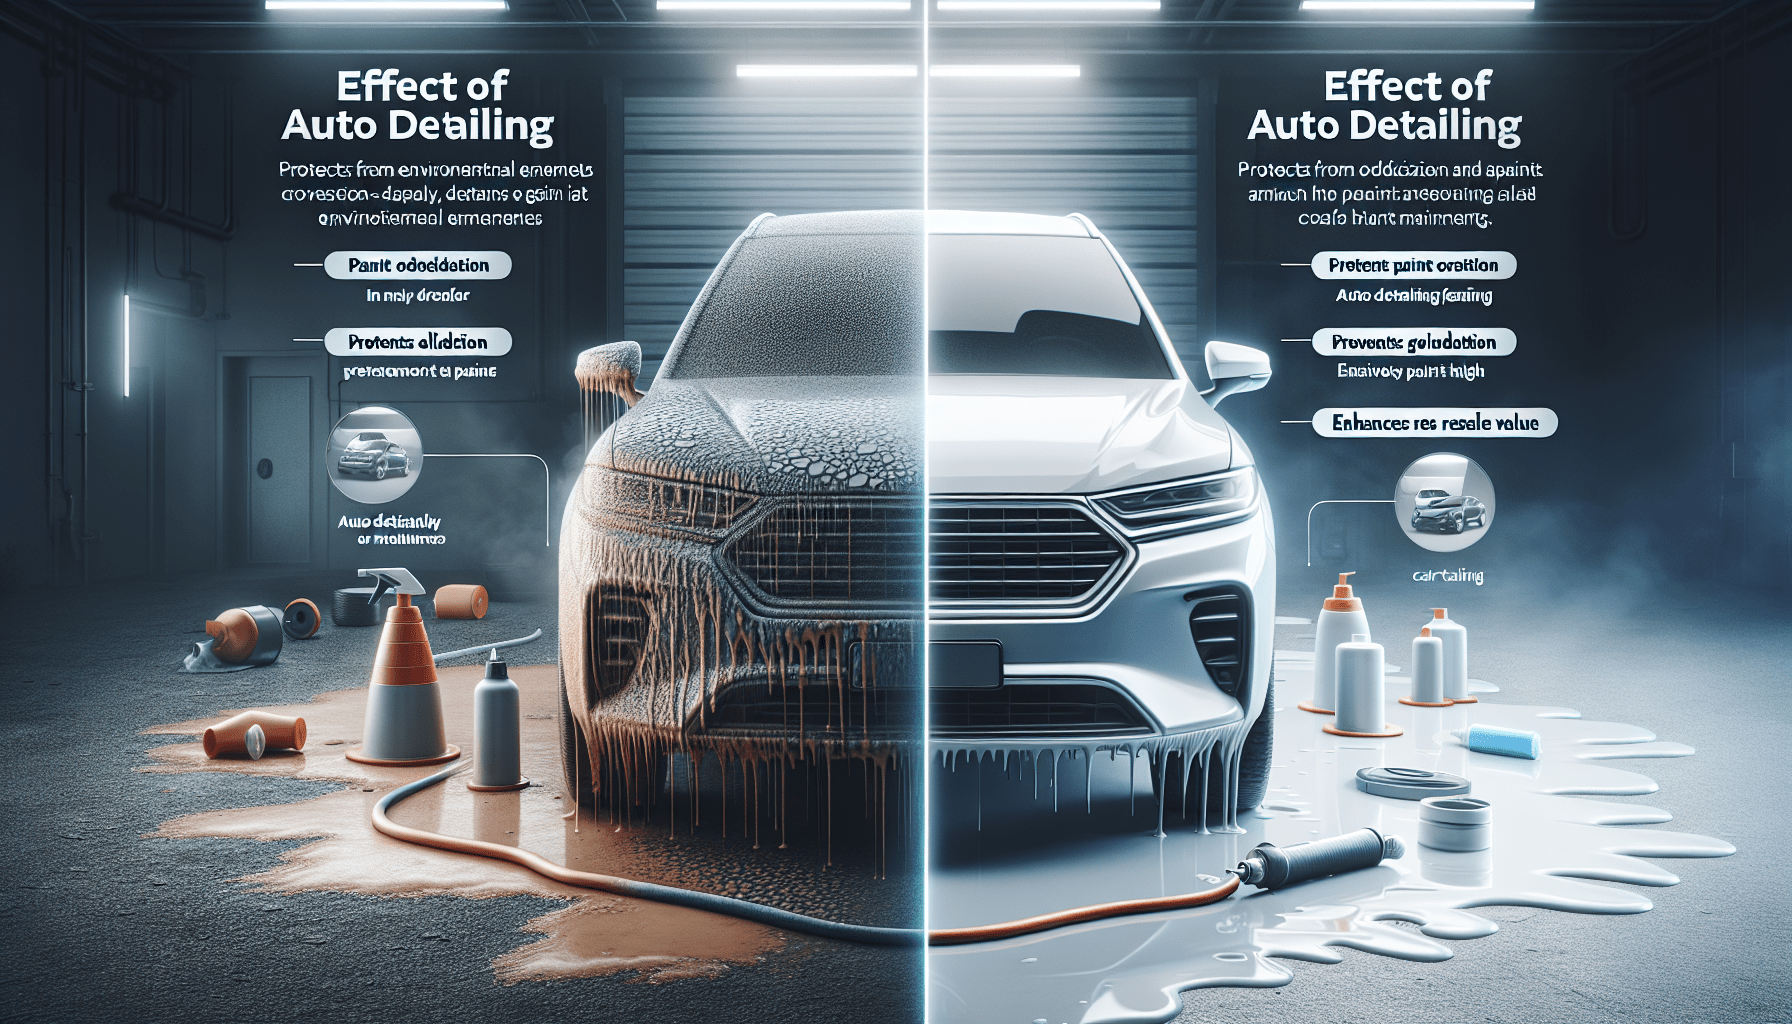 what are the top 5 benefits of auto detailing in enhancing paint longevity